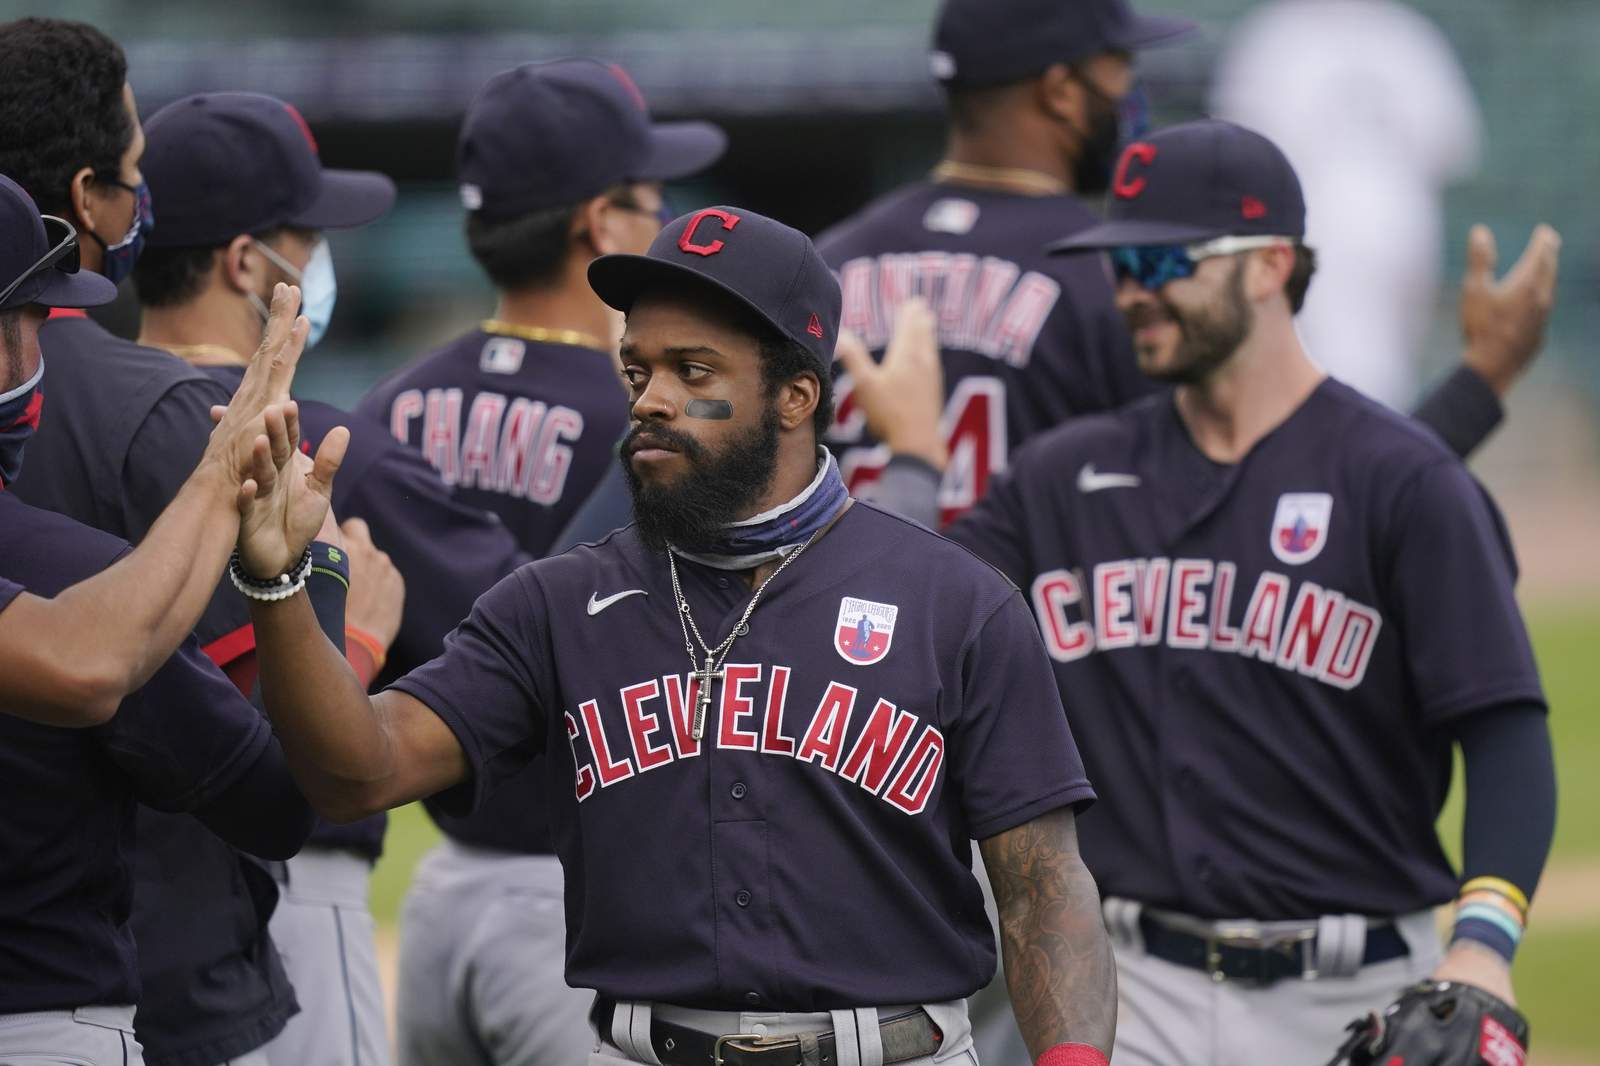 Indians beat Tigers for 20th straight time, Reyes hits 2 HRs